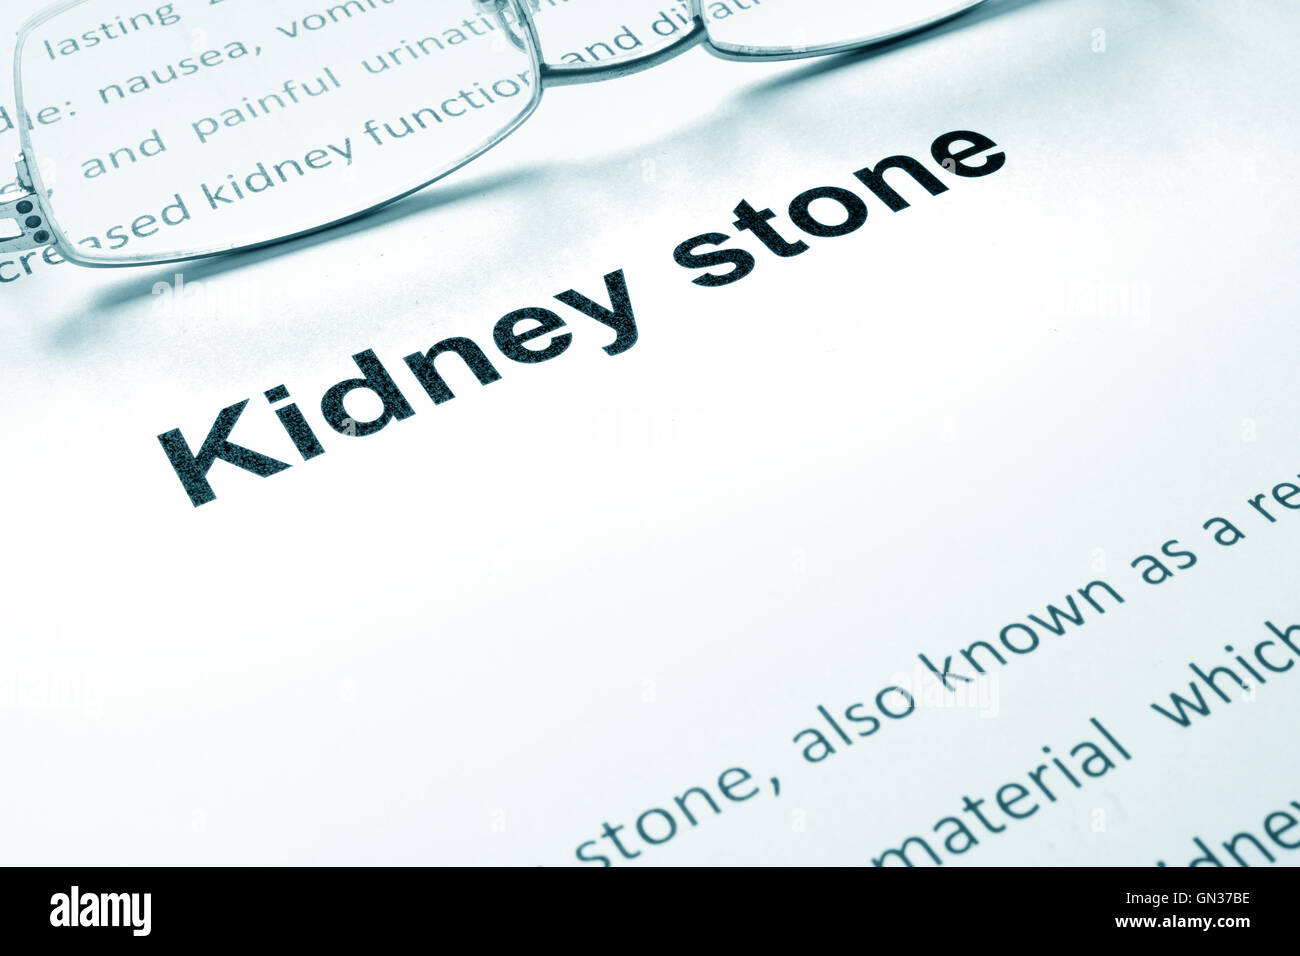 Kidney stone sign on a paper and glasses. Stock Photo